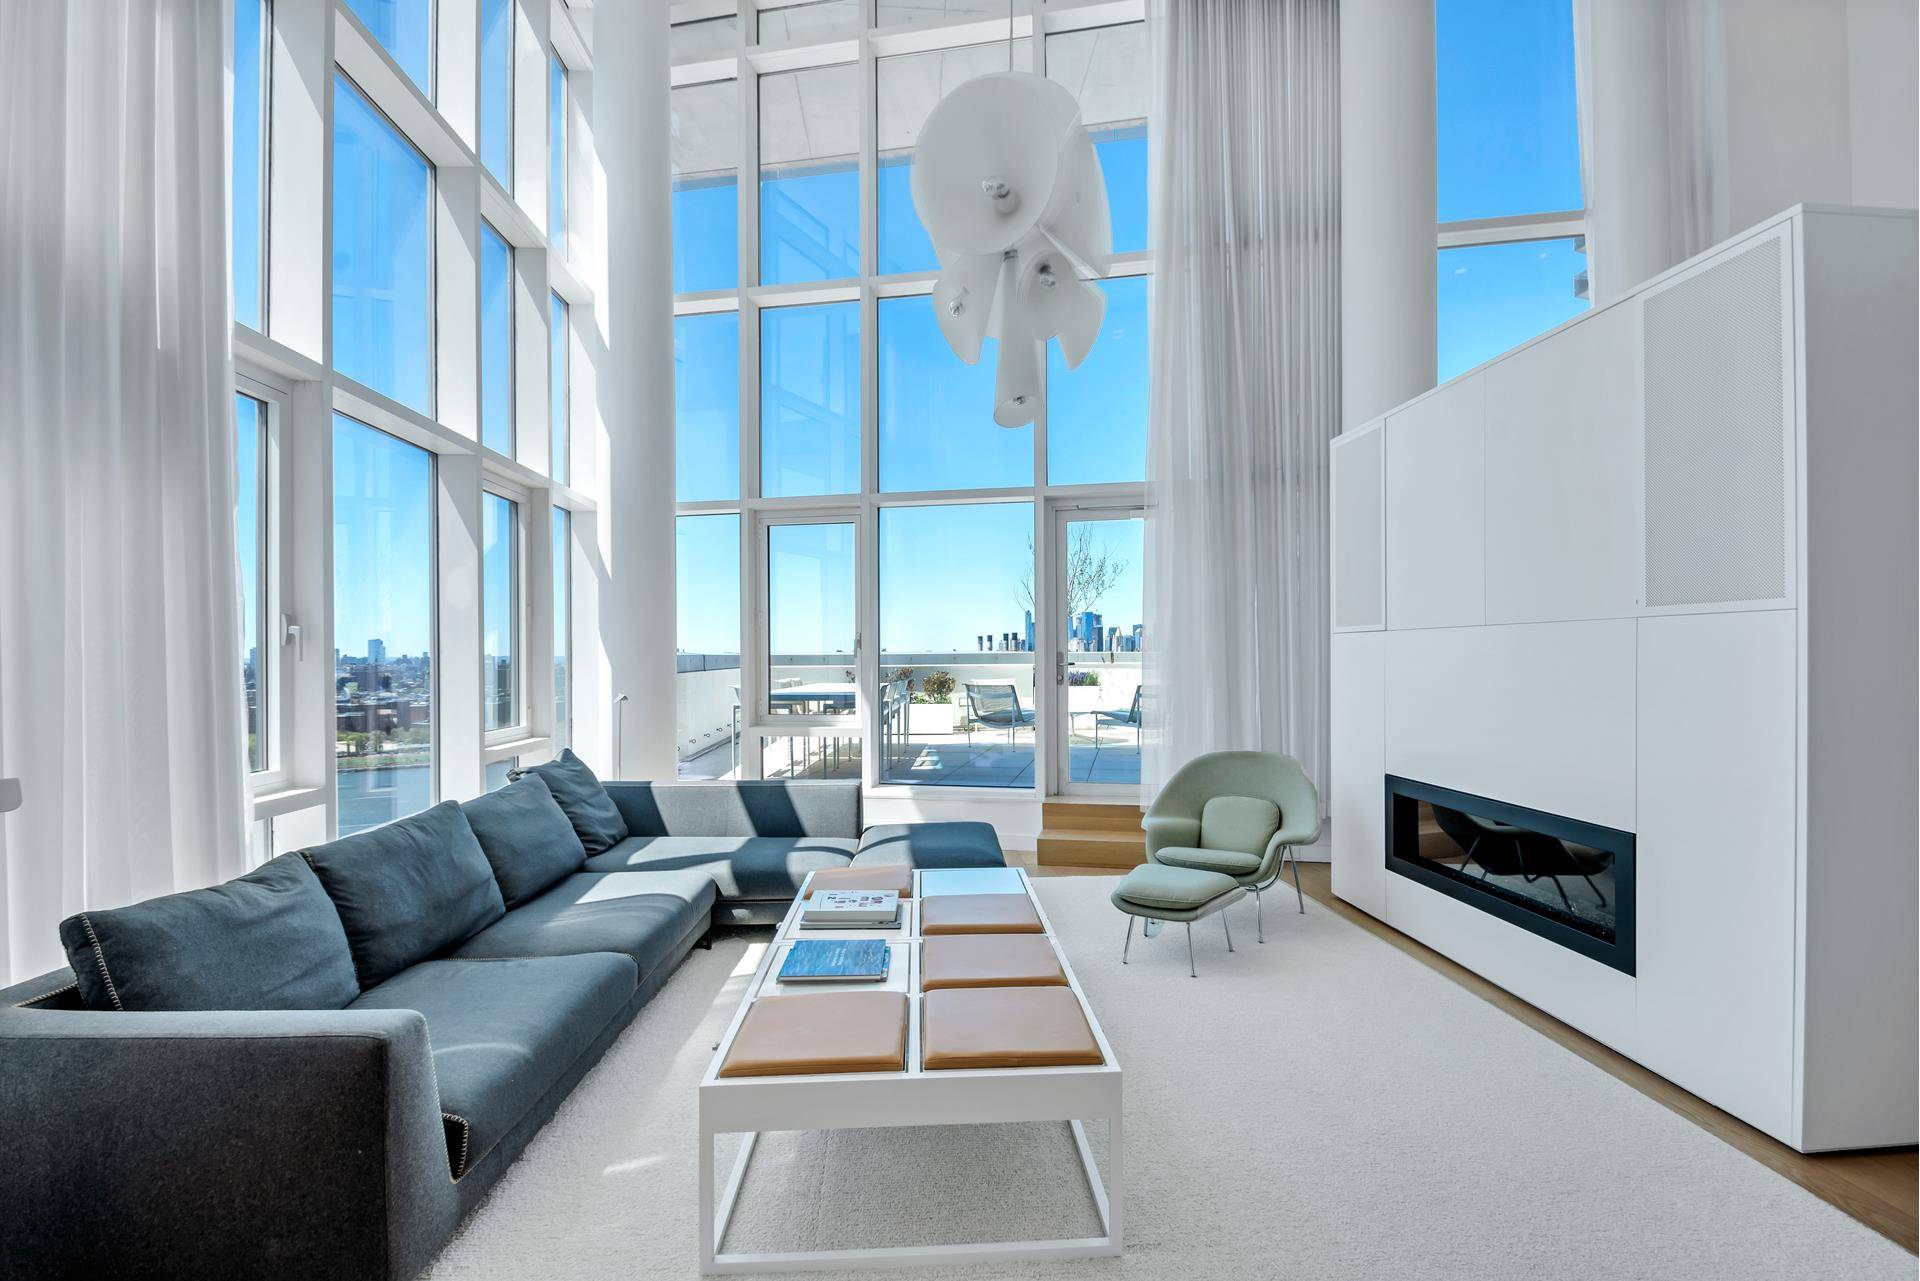 Masterfully envisioned, an incomparable duplex penthouse with a private outdoor terrace overlooking the Manhattan Skyline is now available at the Edge Condominium in Williamsburg.